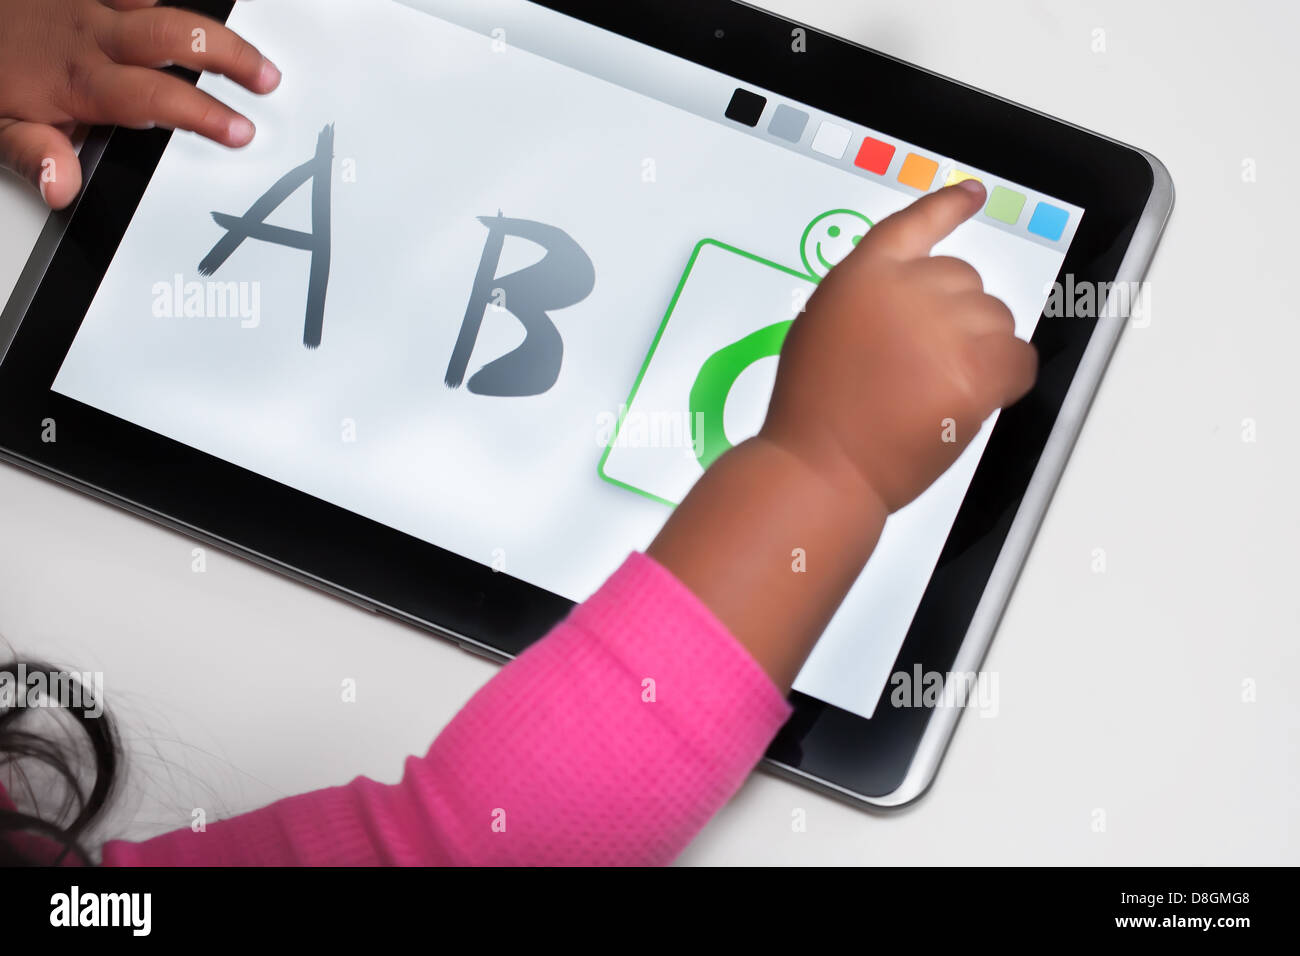 The hand of a child on a touchscreen tablet with educational software. Stock Photo